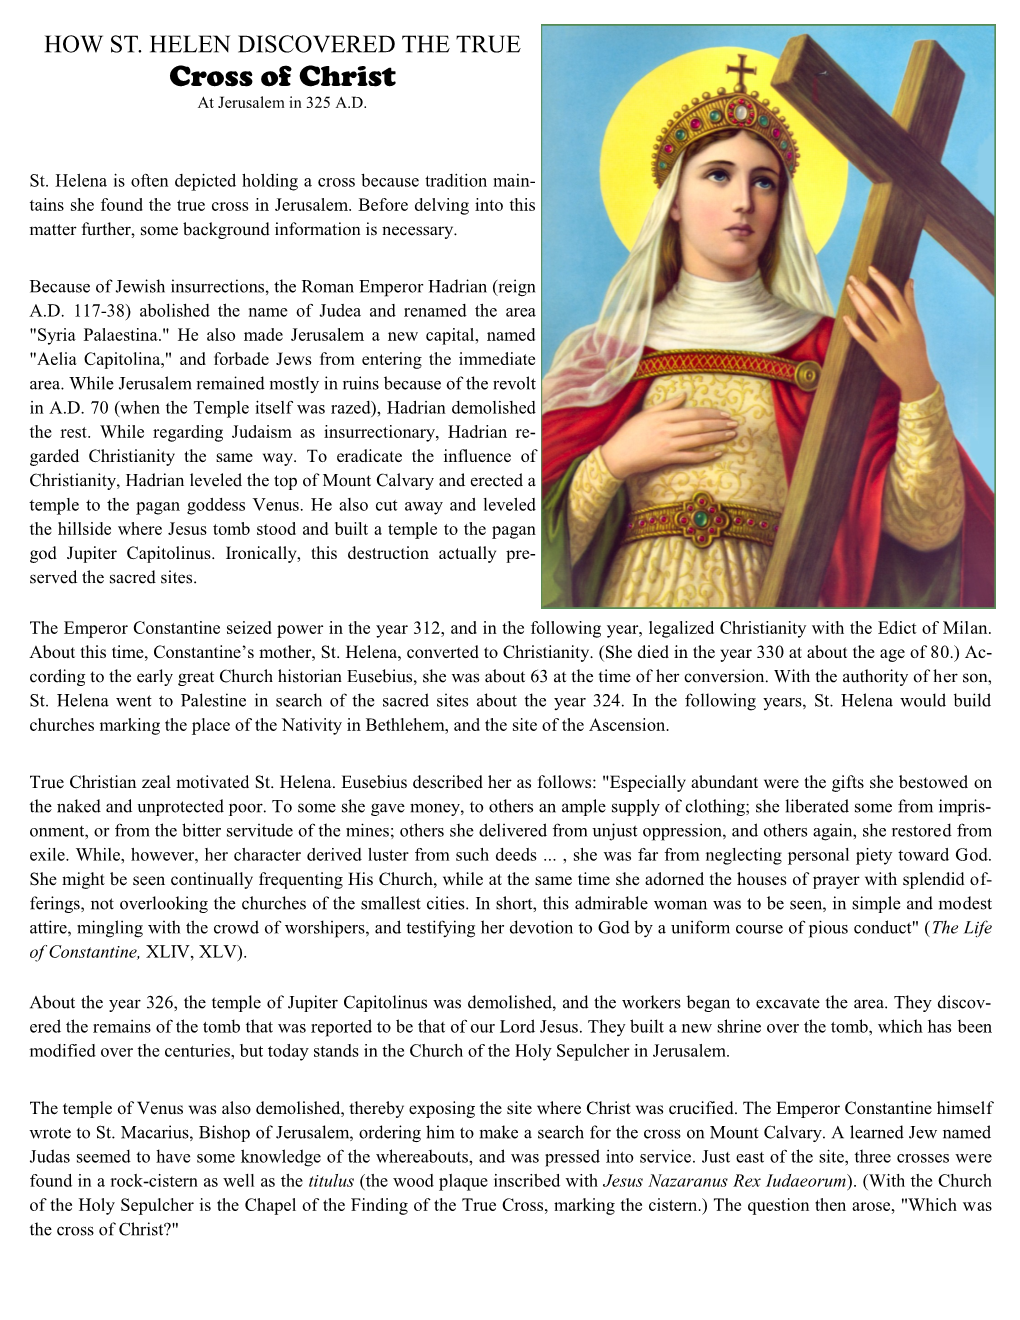 Story of St. Helena and the True Cross.Pdf